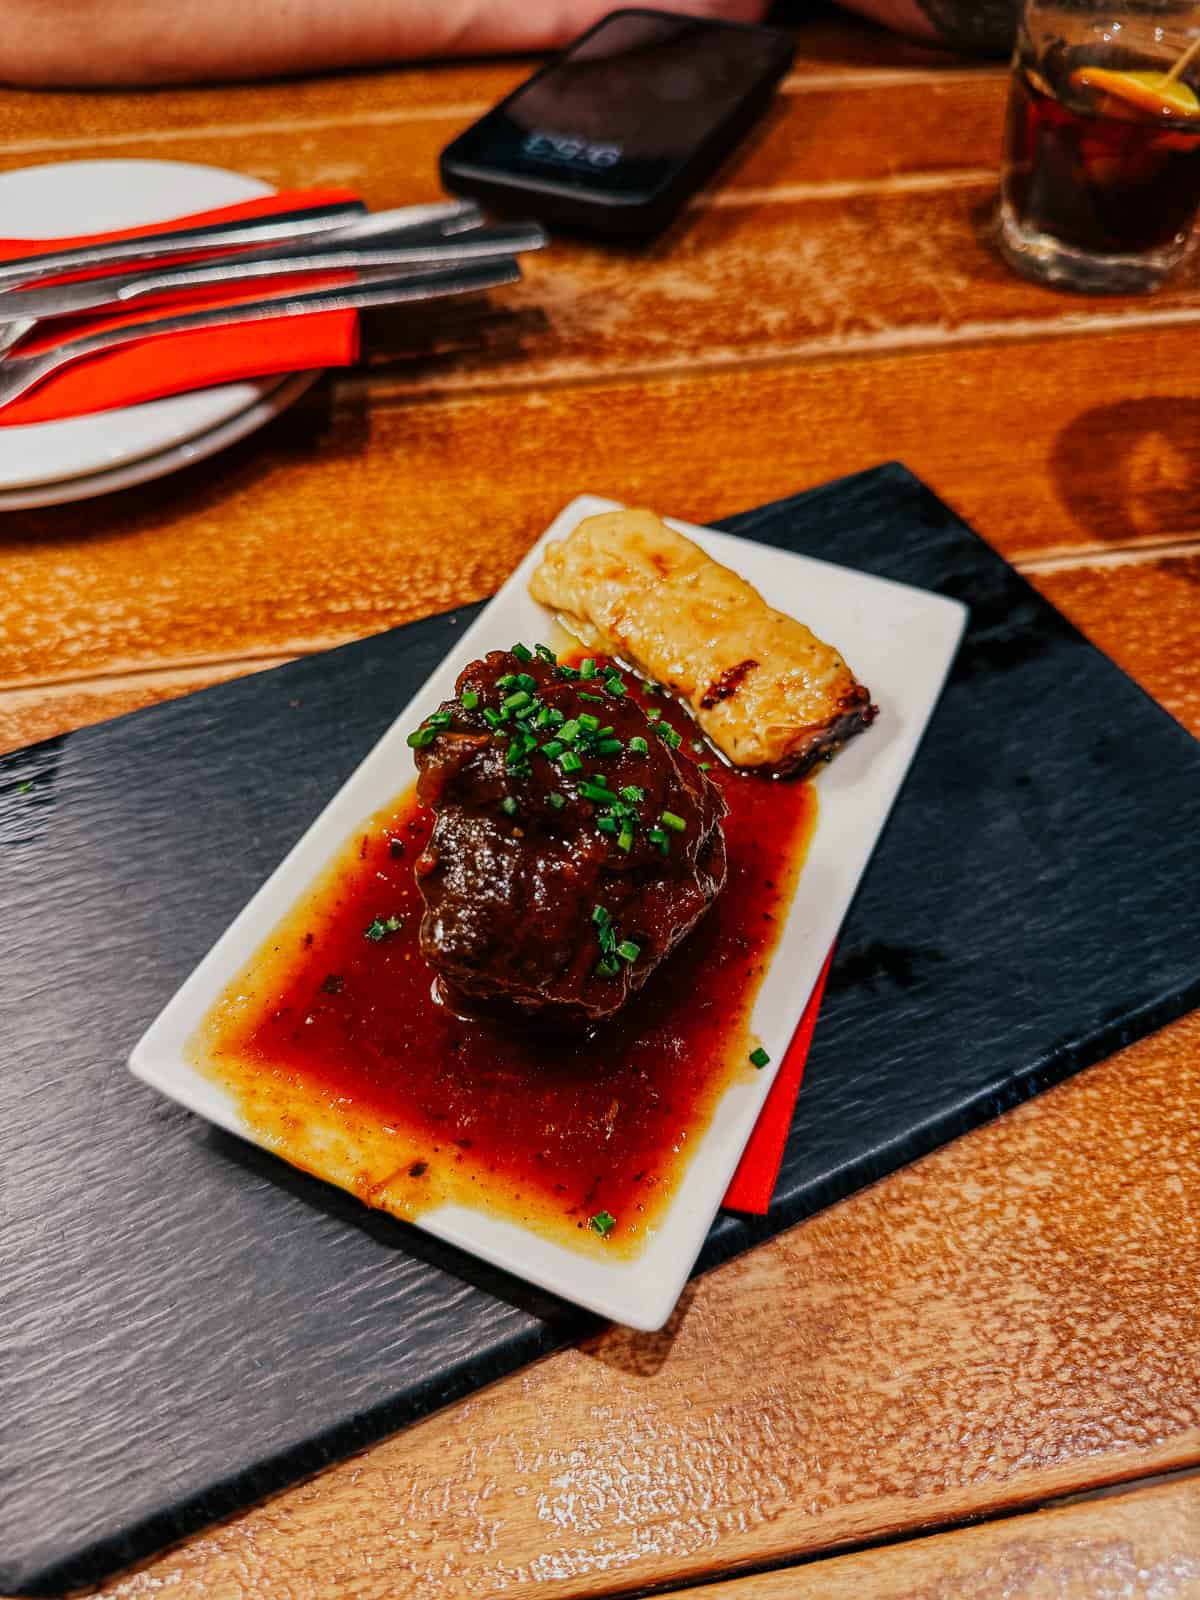 A succulent piece of braised meat in a rich brown sauce, paired with a cheesy gratin, served on a rectangular white plate over a slate board.